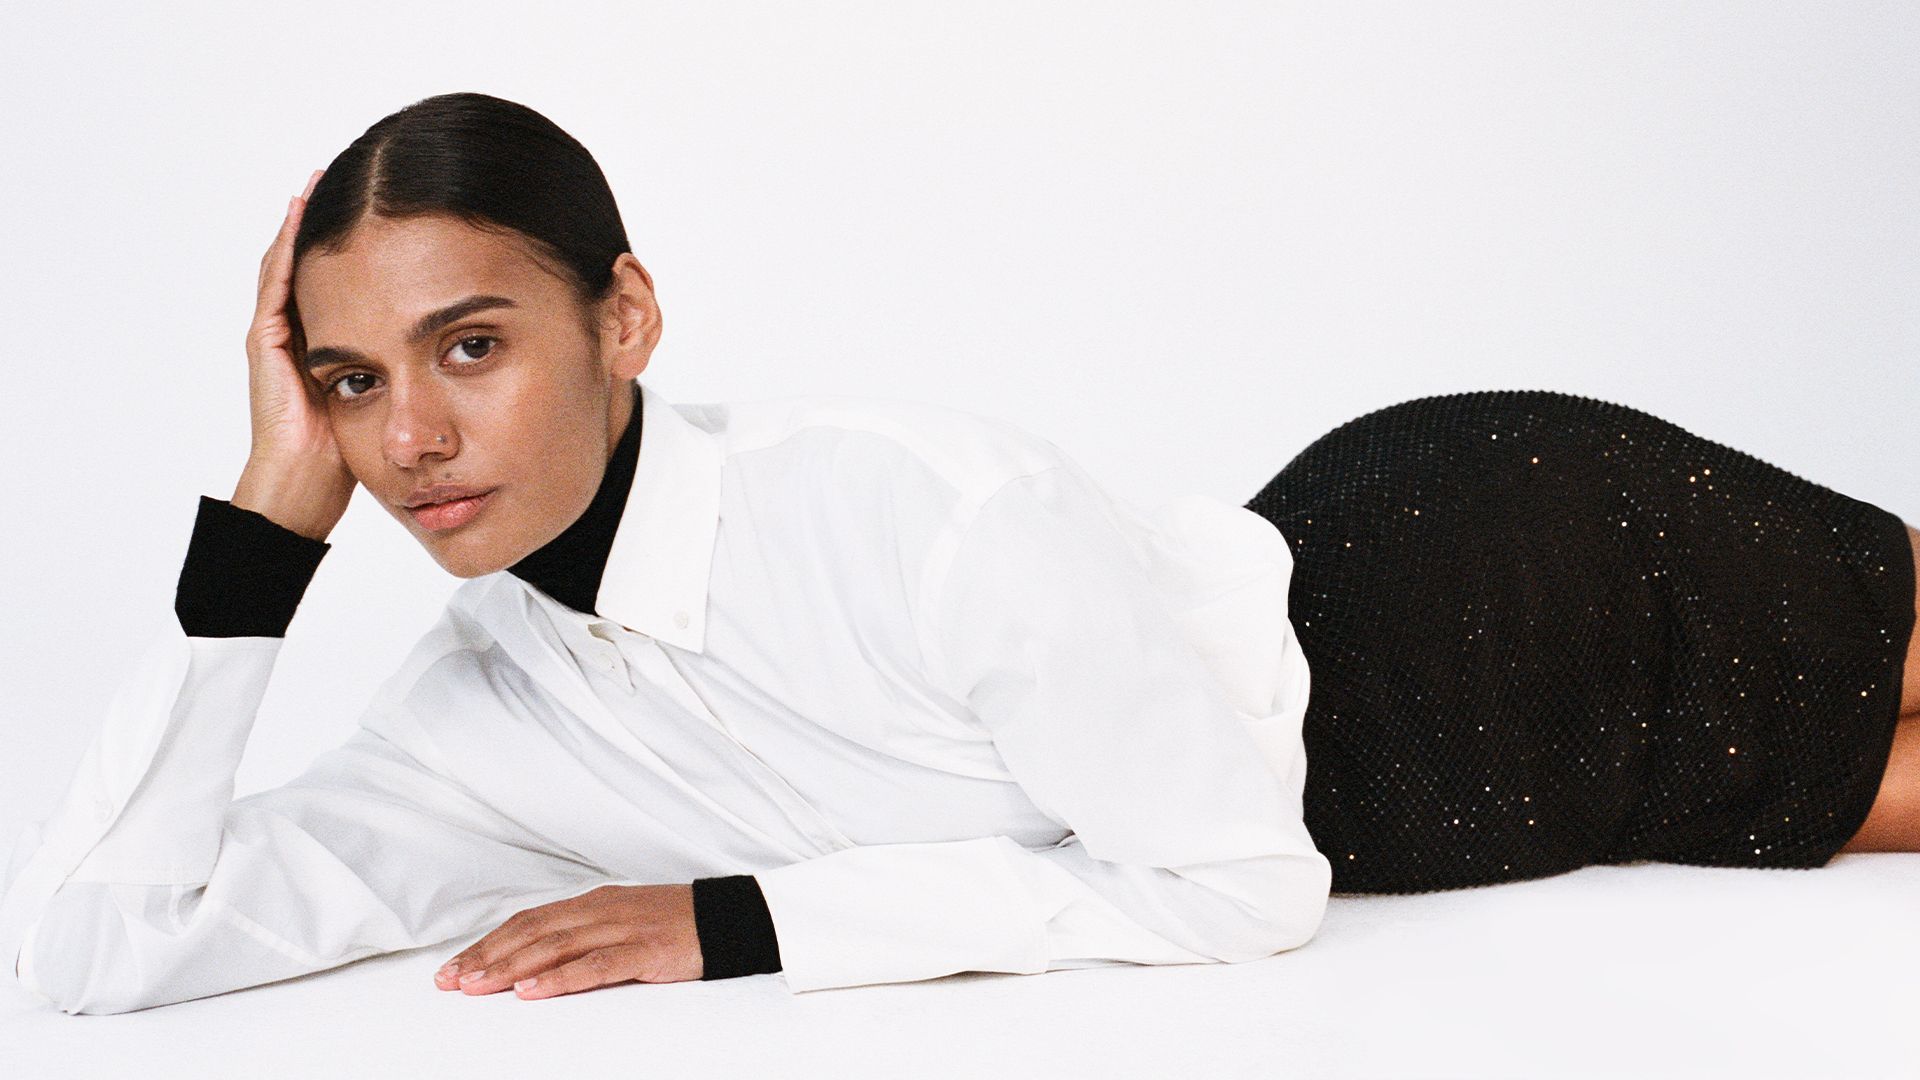 Madeleine Madden lying down with one arm propped up wearing white cotton shirt and sparkly diamante mini skirt